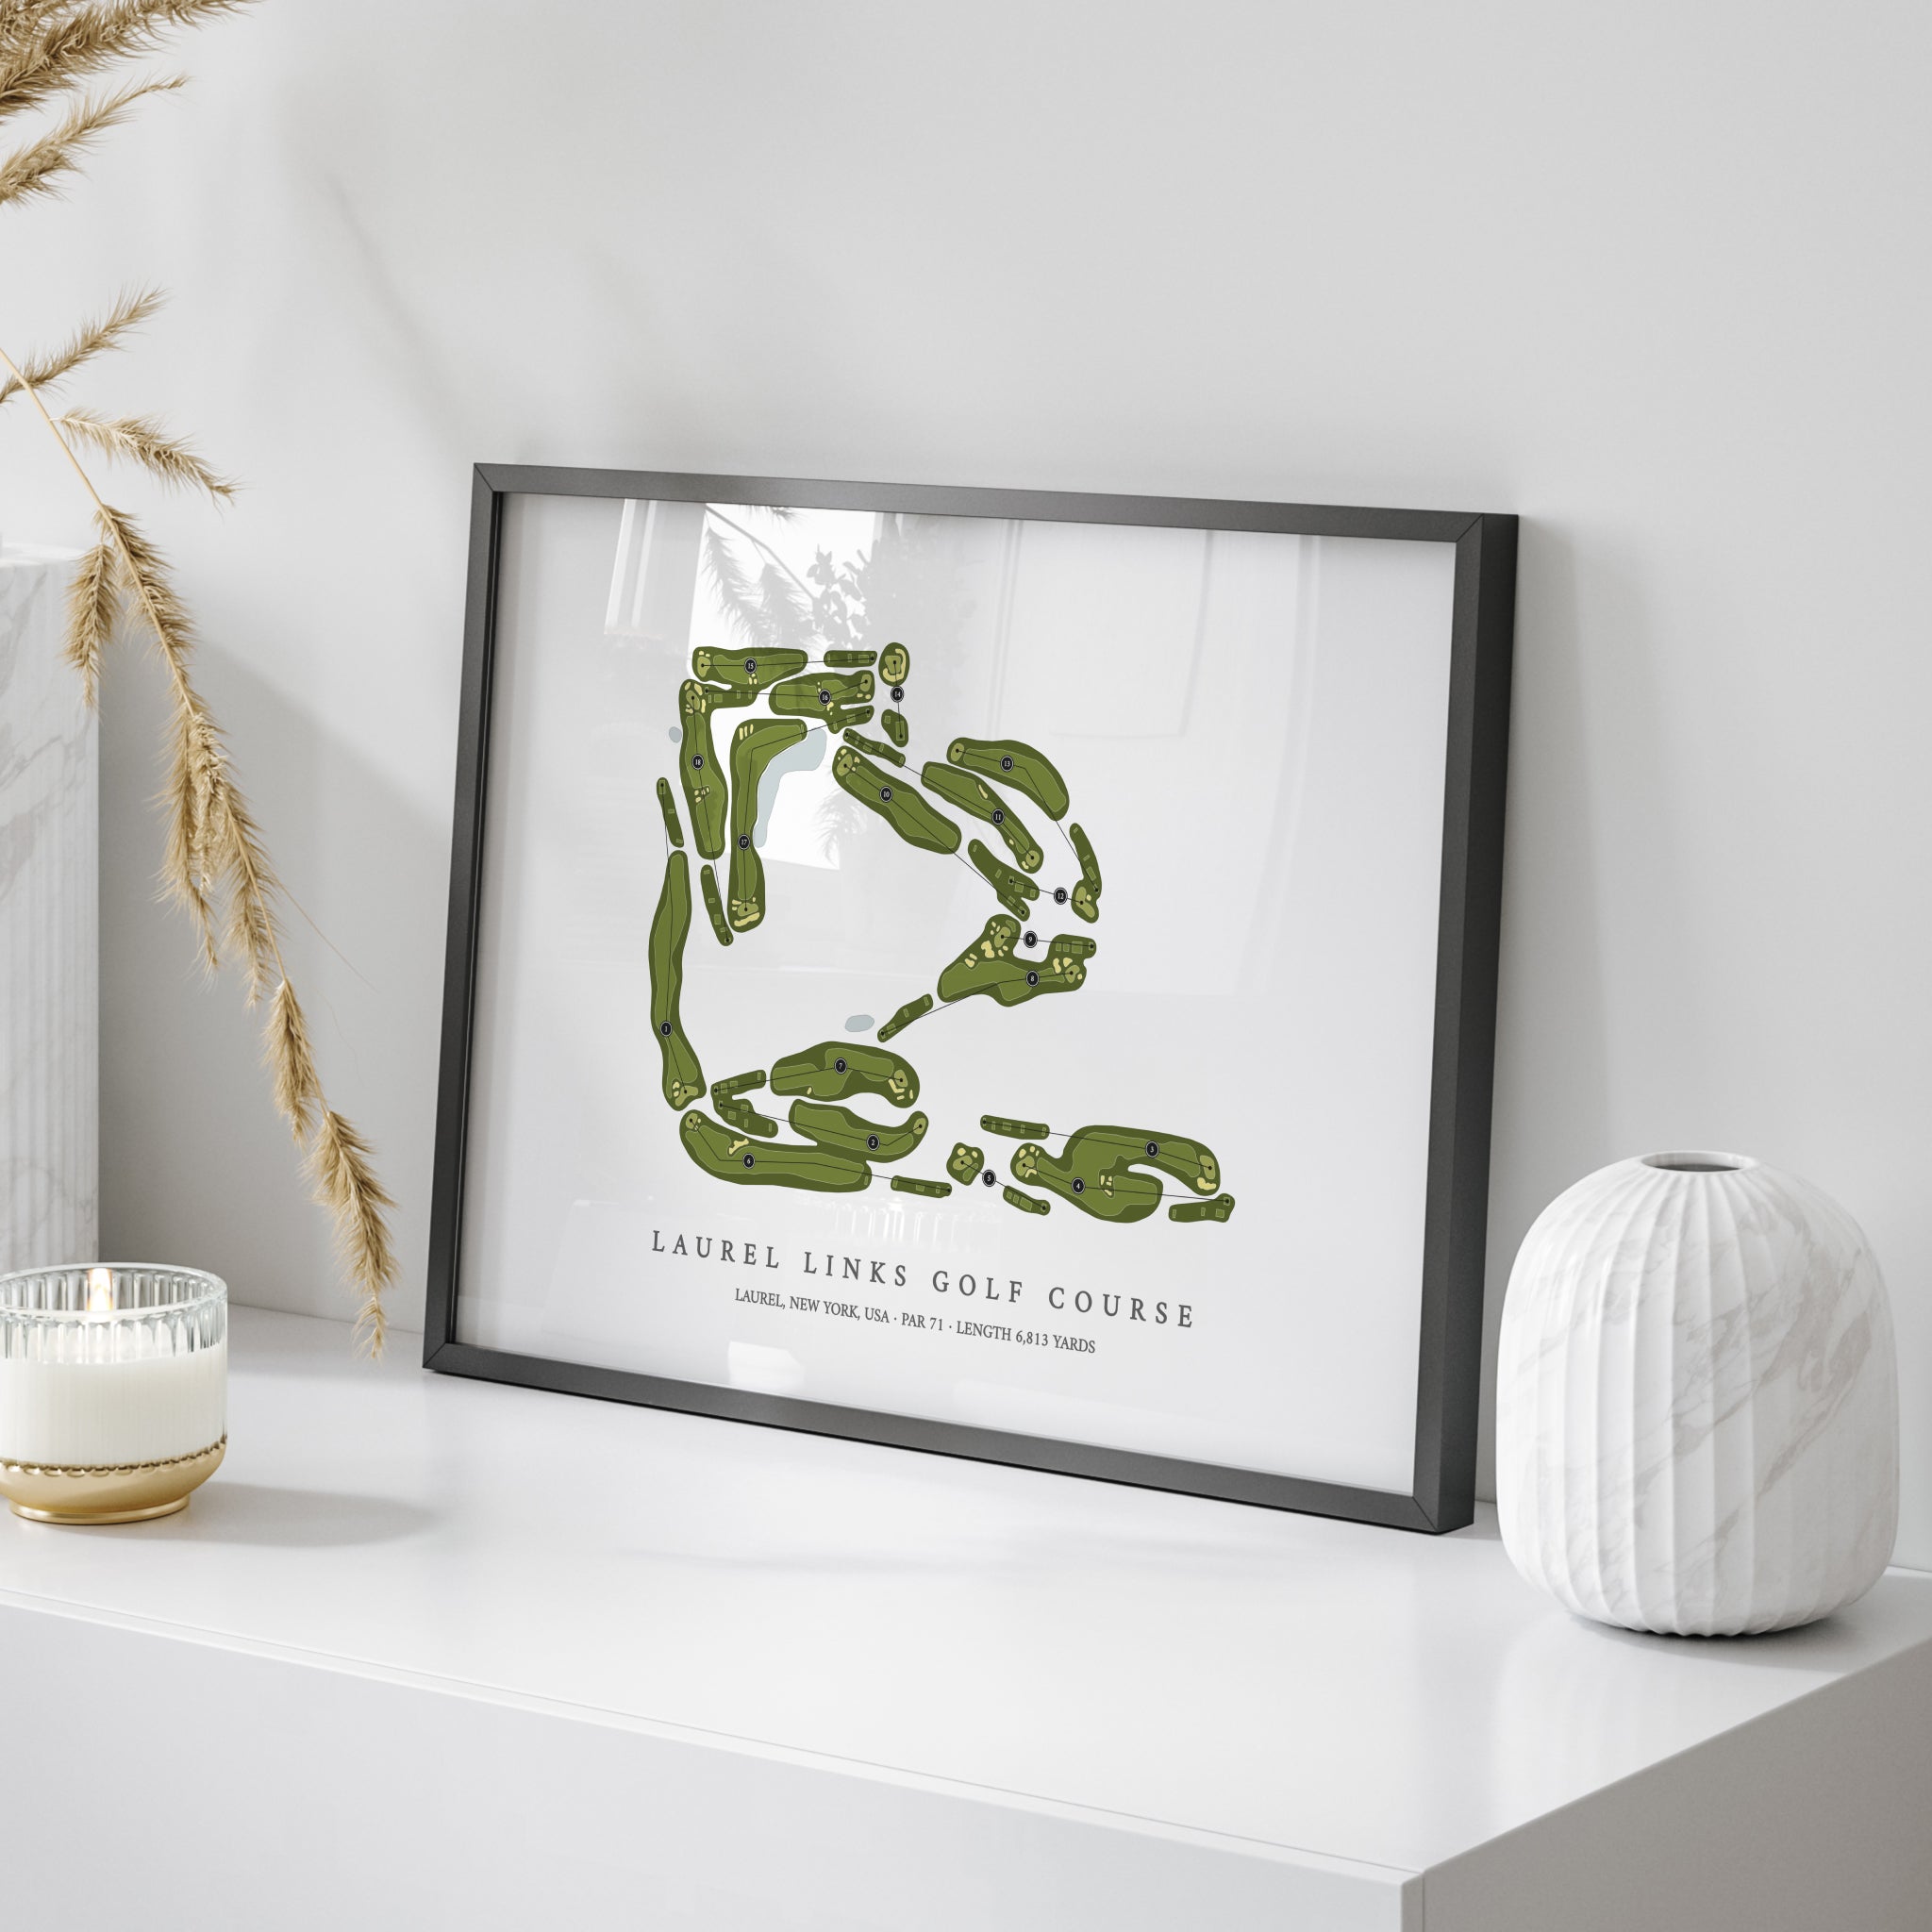 Laurel Links Golf Course | Golf Course Print | On Table 